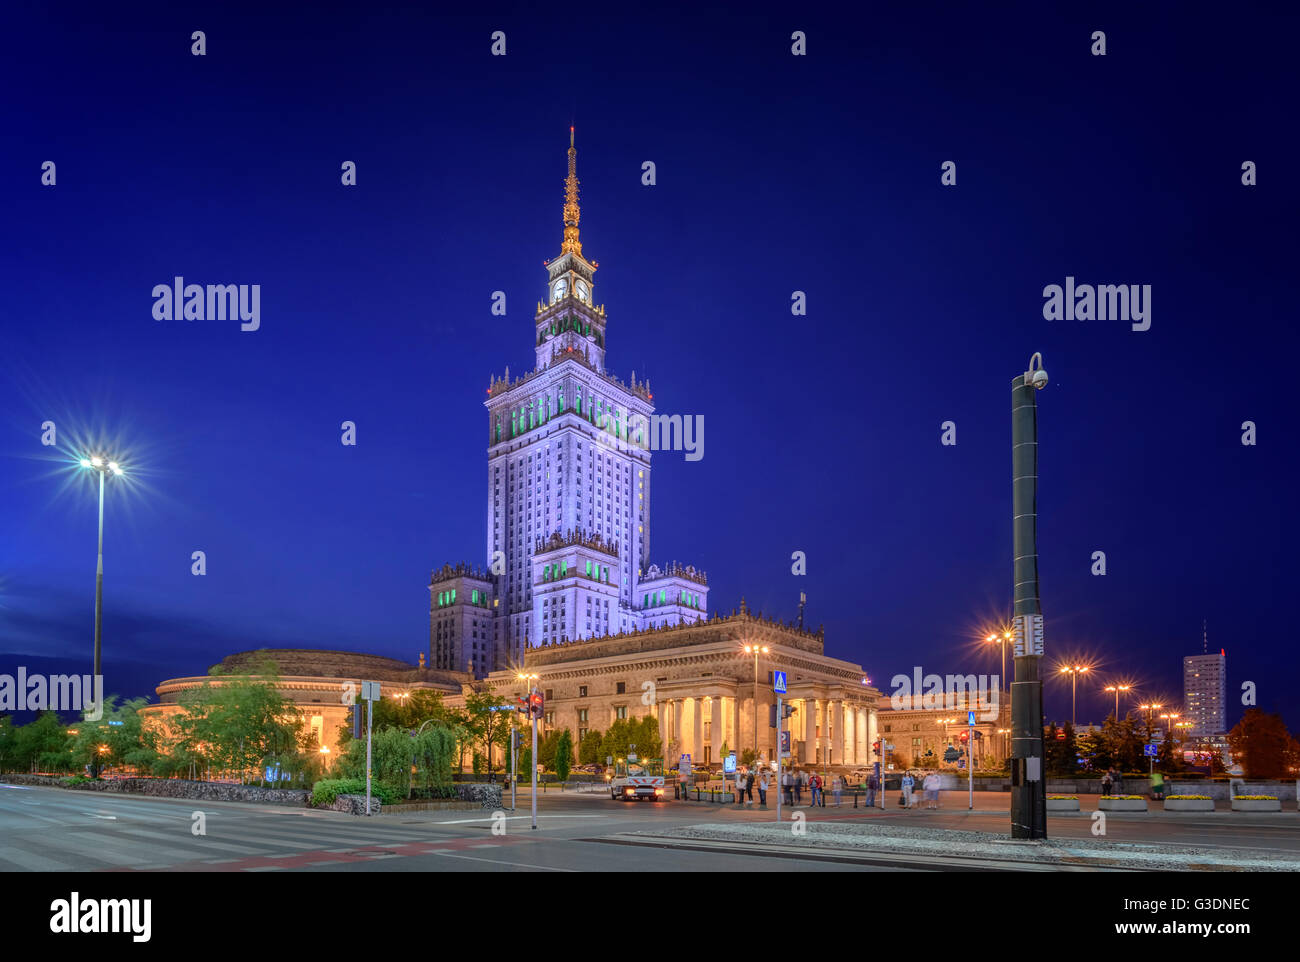 Warsaw Palace of Culture and Science in Warsaw Poland Stock Photo